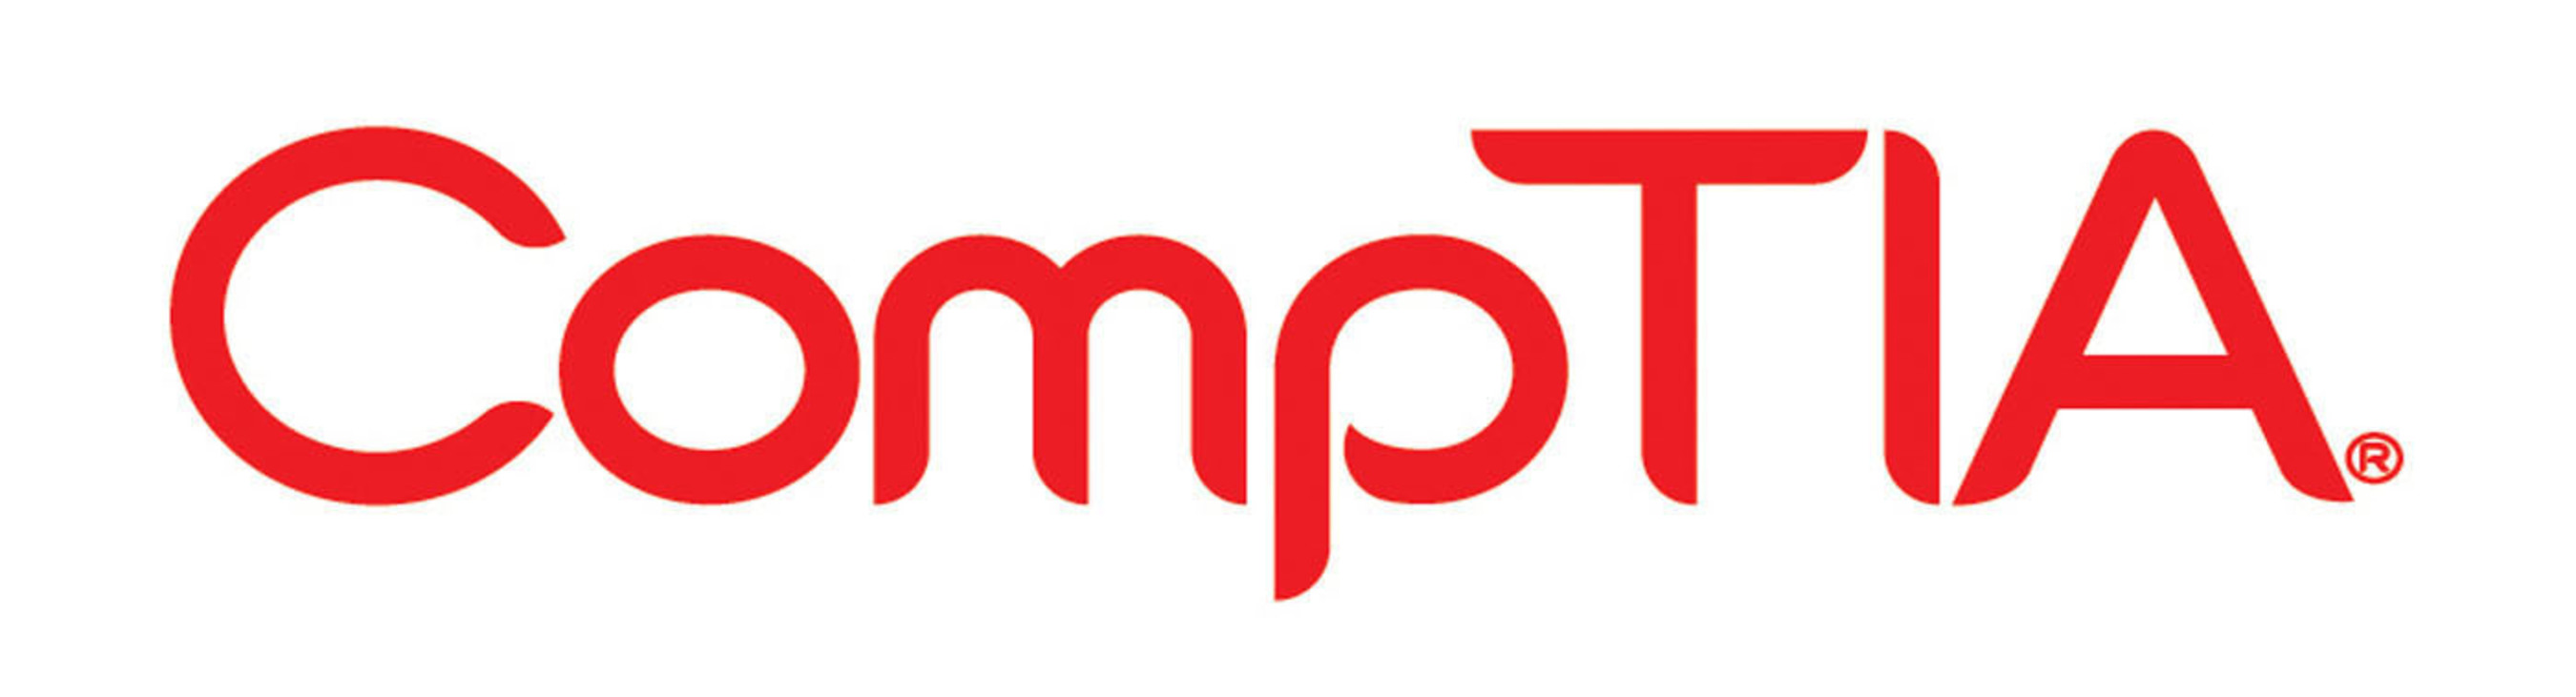 CompTIA is the voice of the world's information technology industry